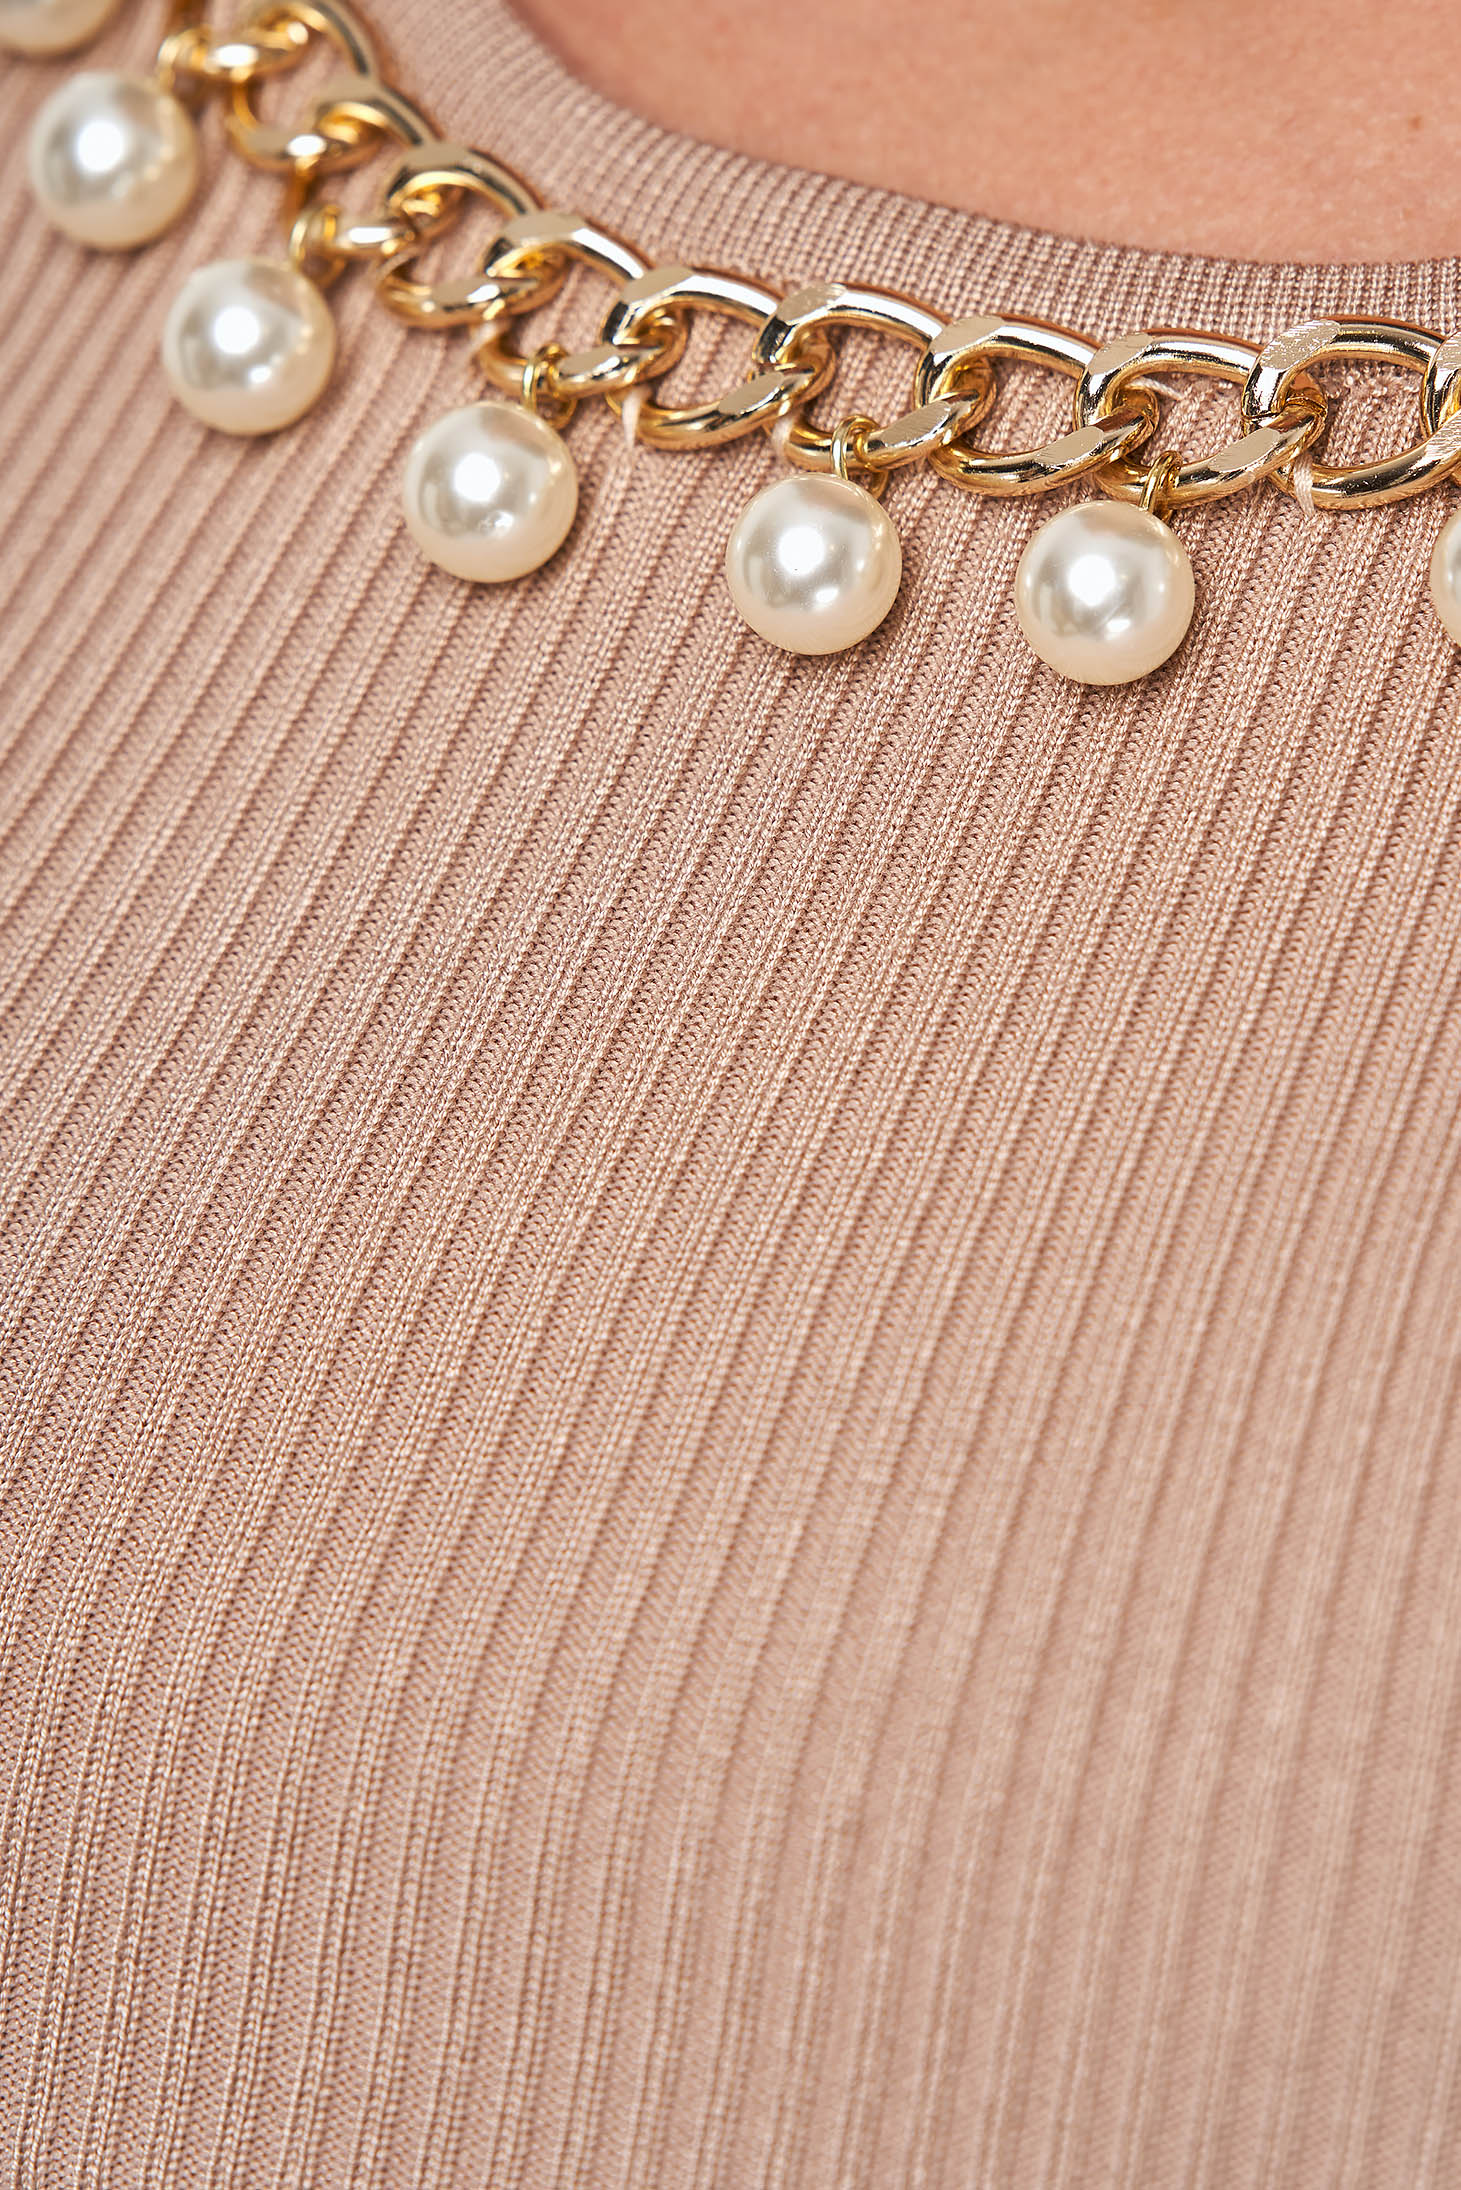 Nude sweater tented from striped fabric metallic chain accessory with pearls 5 - StarShinerS.com